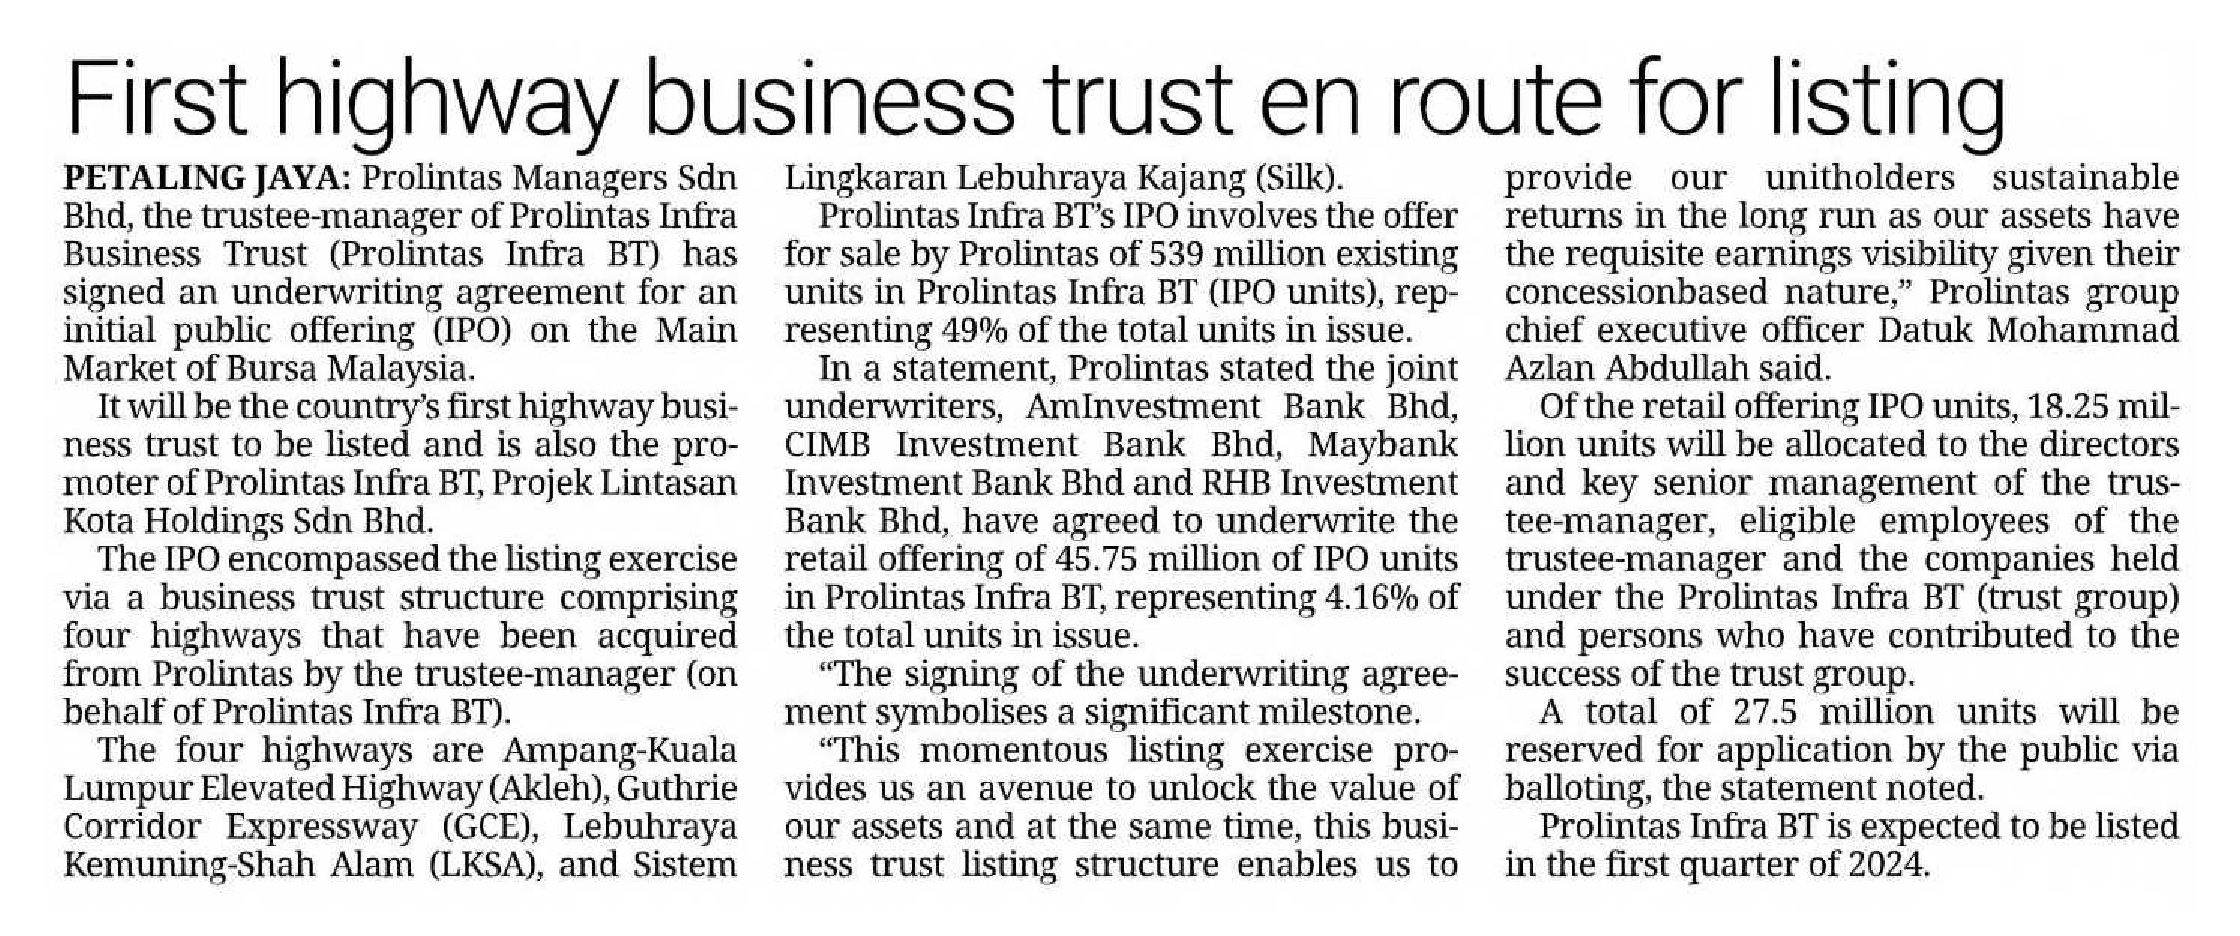 THE STAR – FIRST HIGHWAY BUSINESS TRUST EN ROUTE FOR LISTING